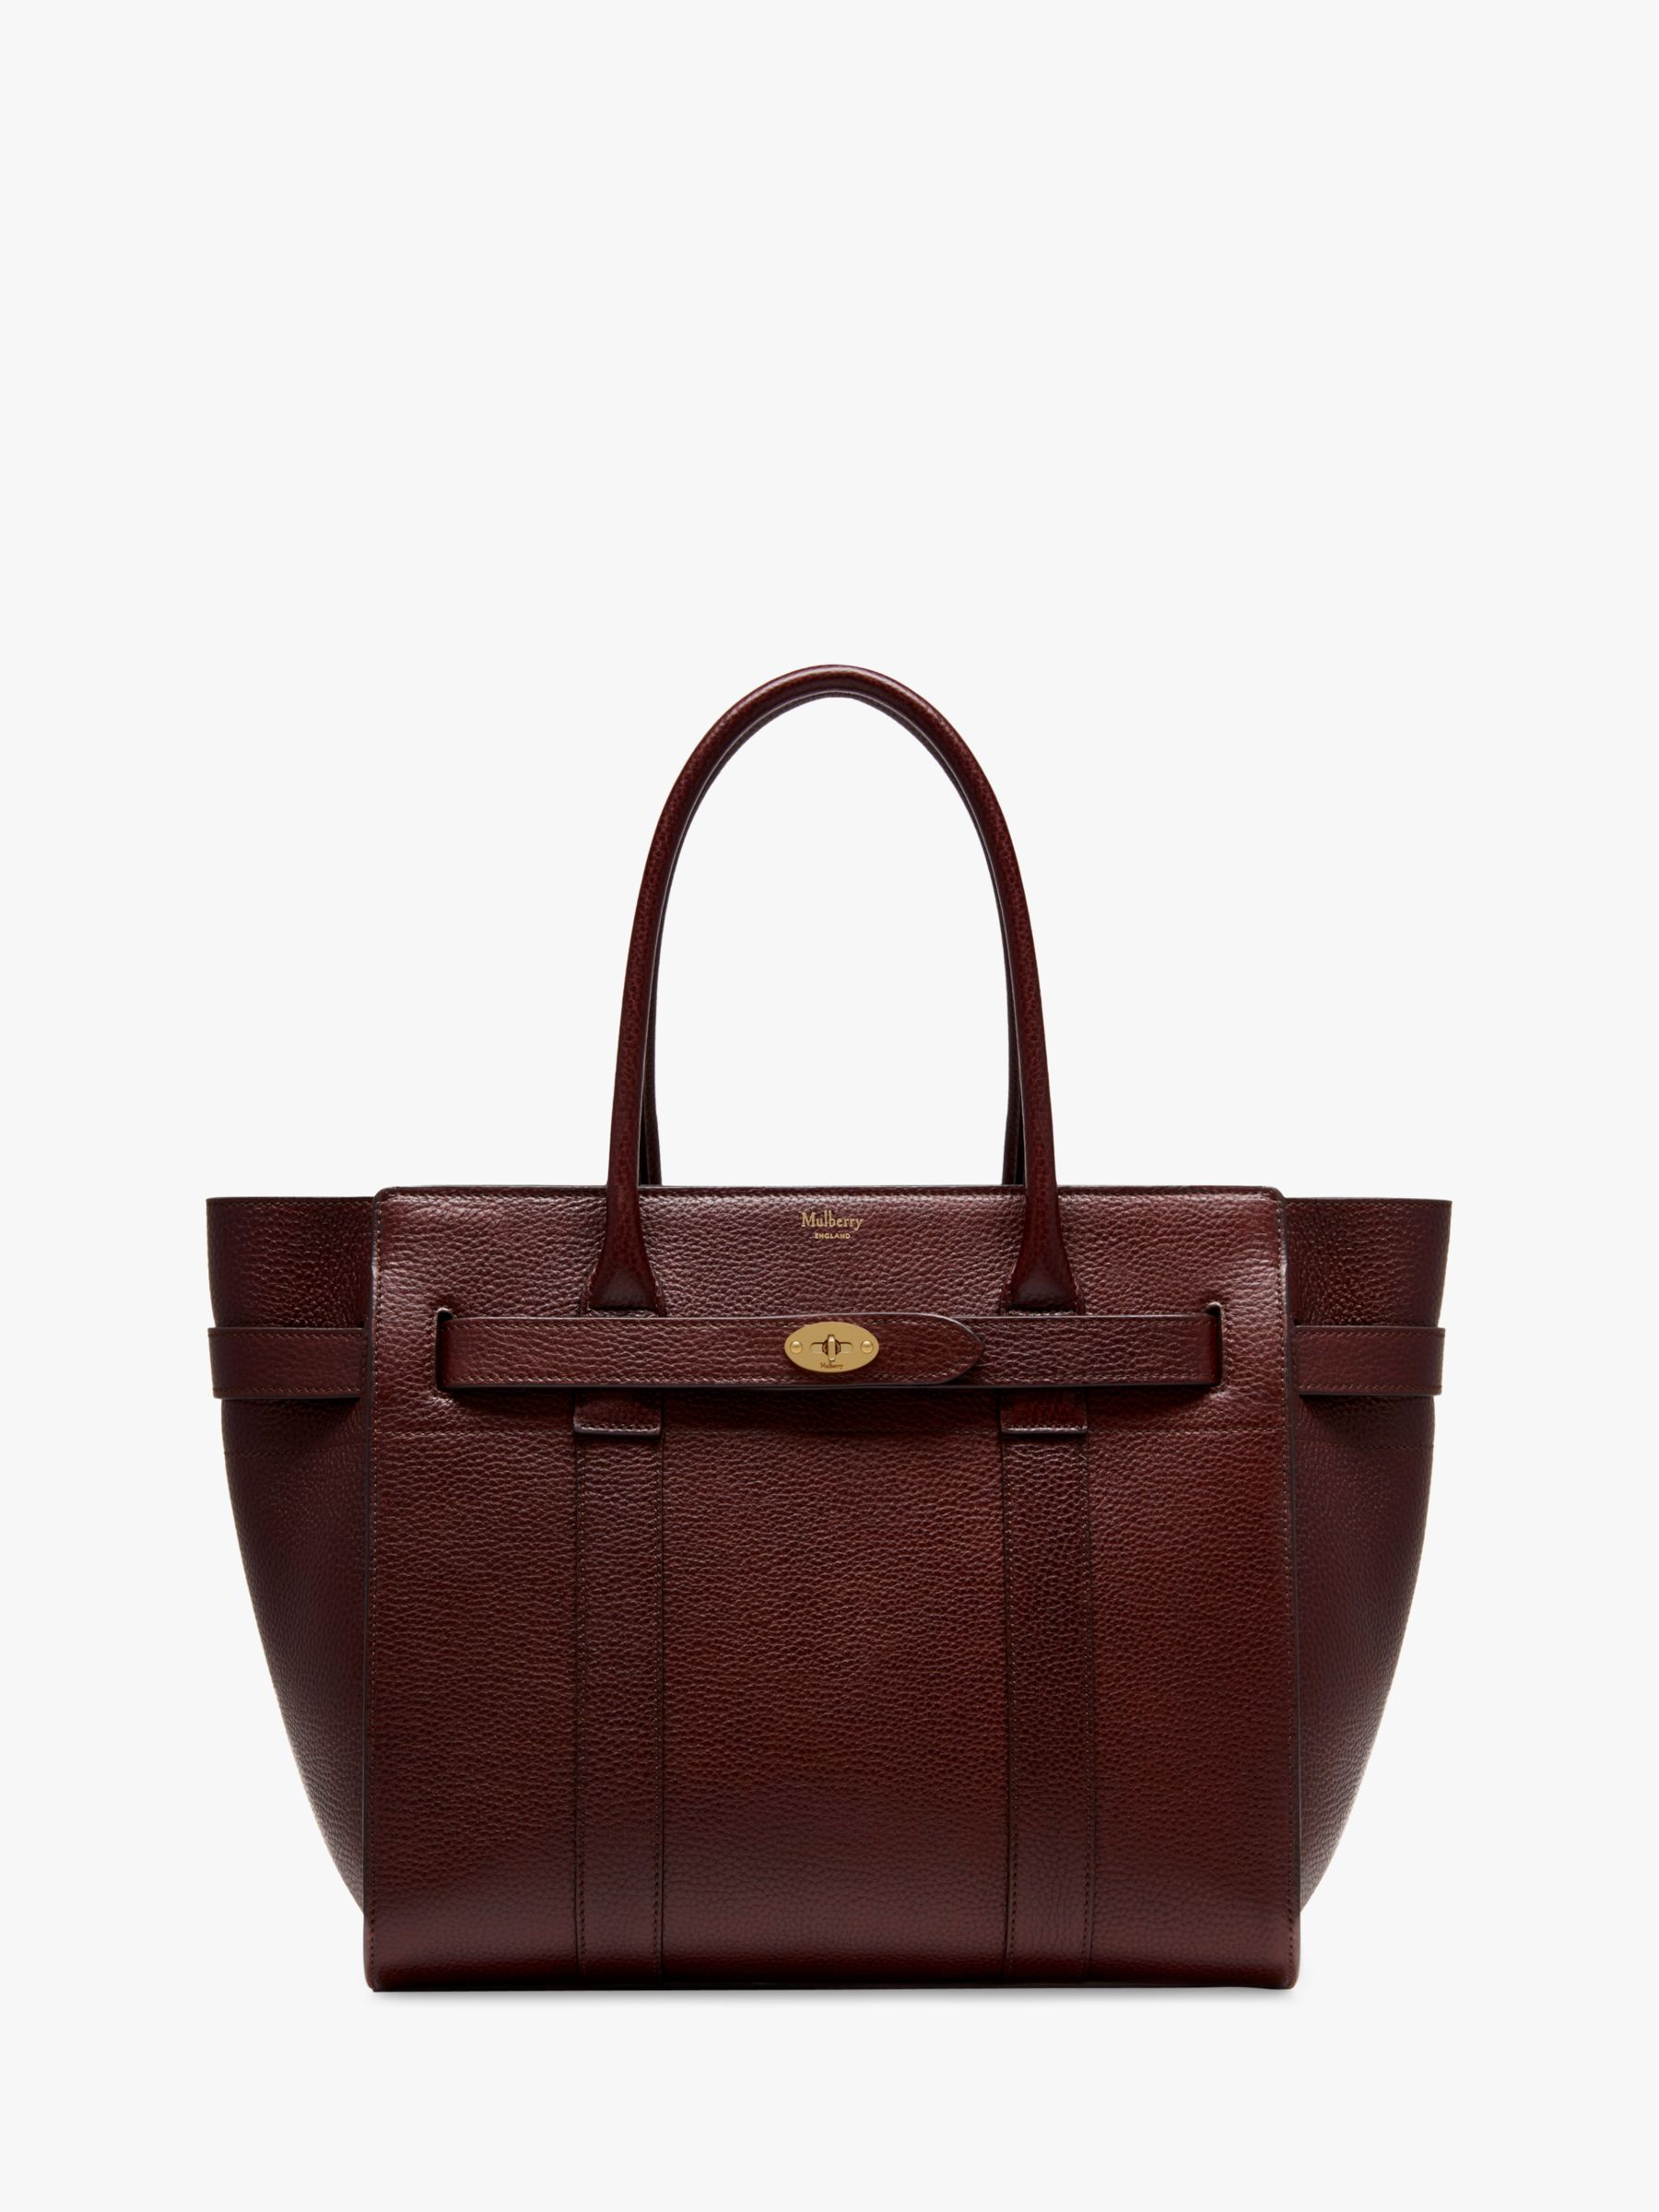 Mulberry Bayswater Zipped Grain Veg Tanned Leather Tote Bag at John ...